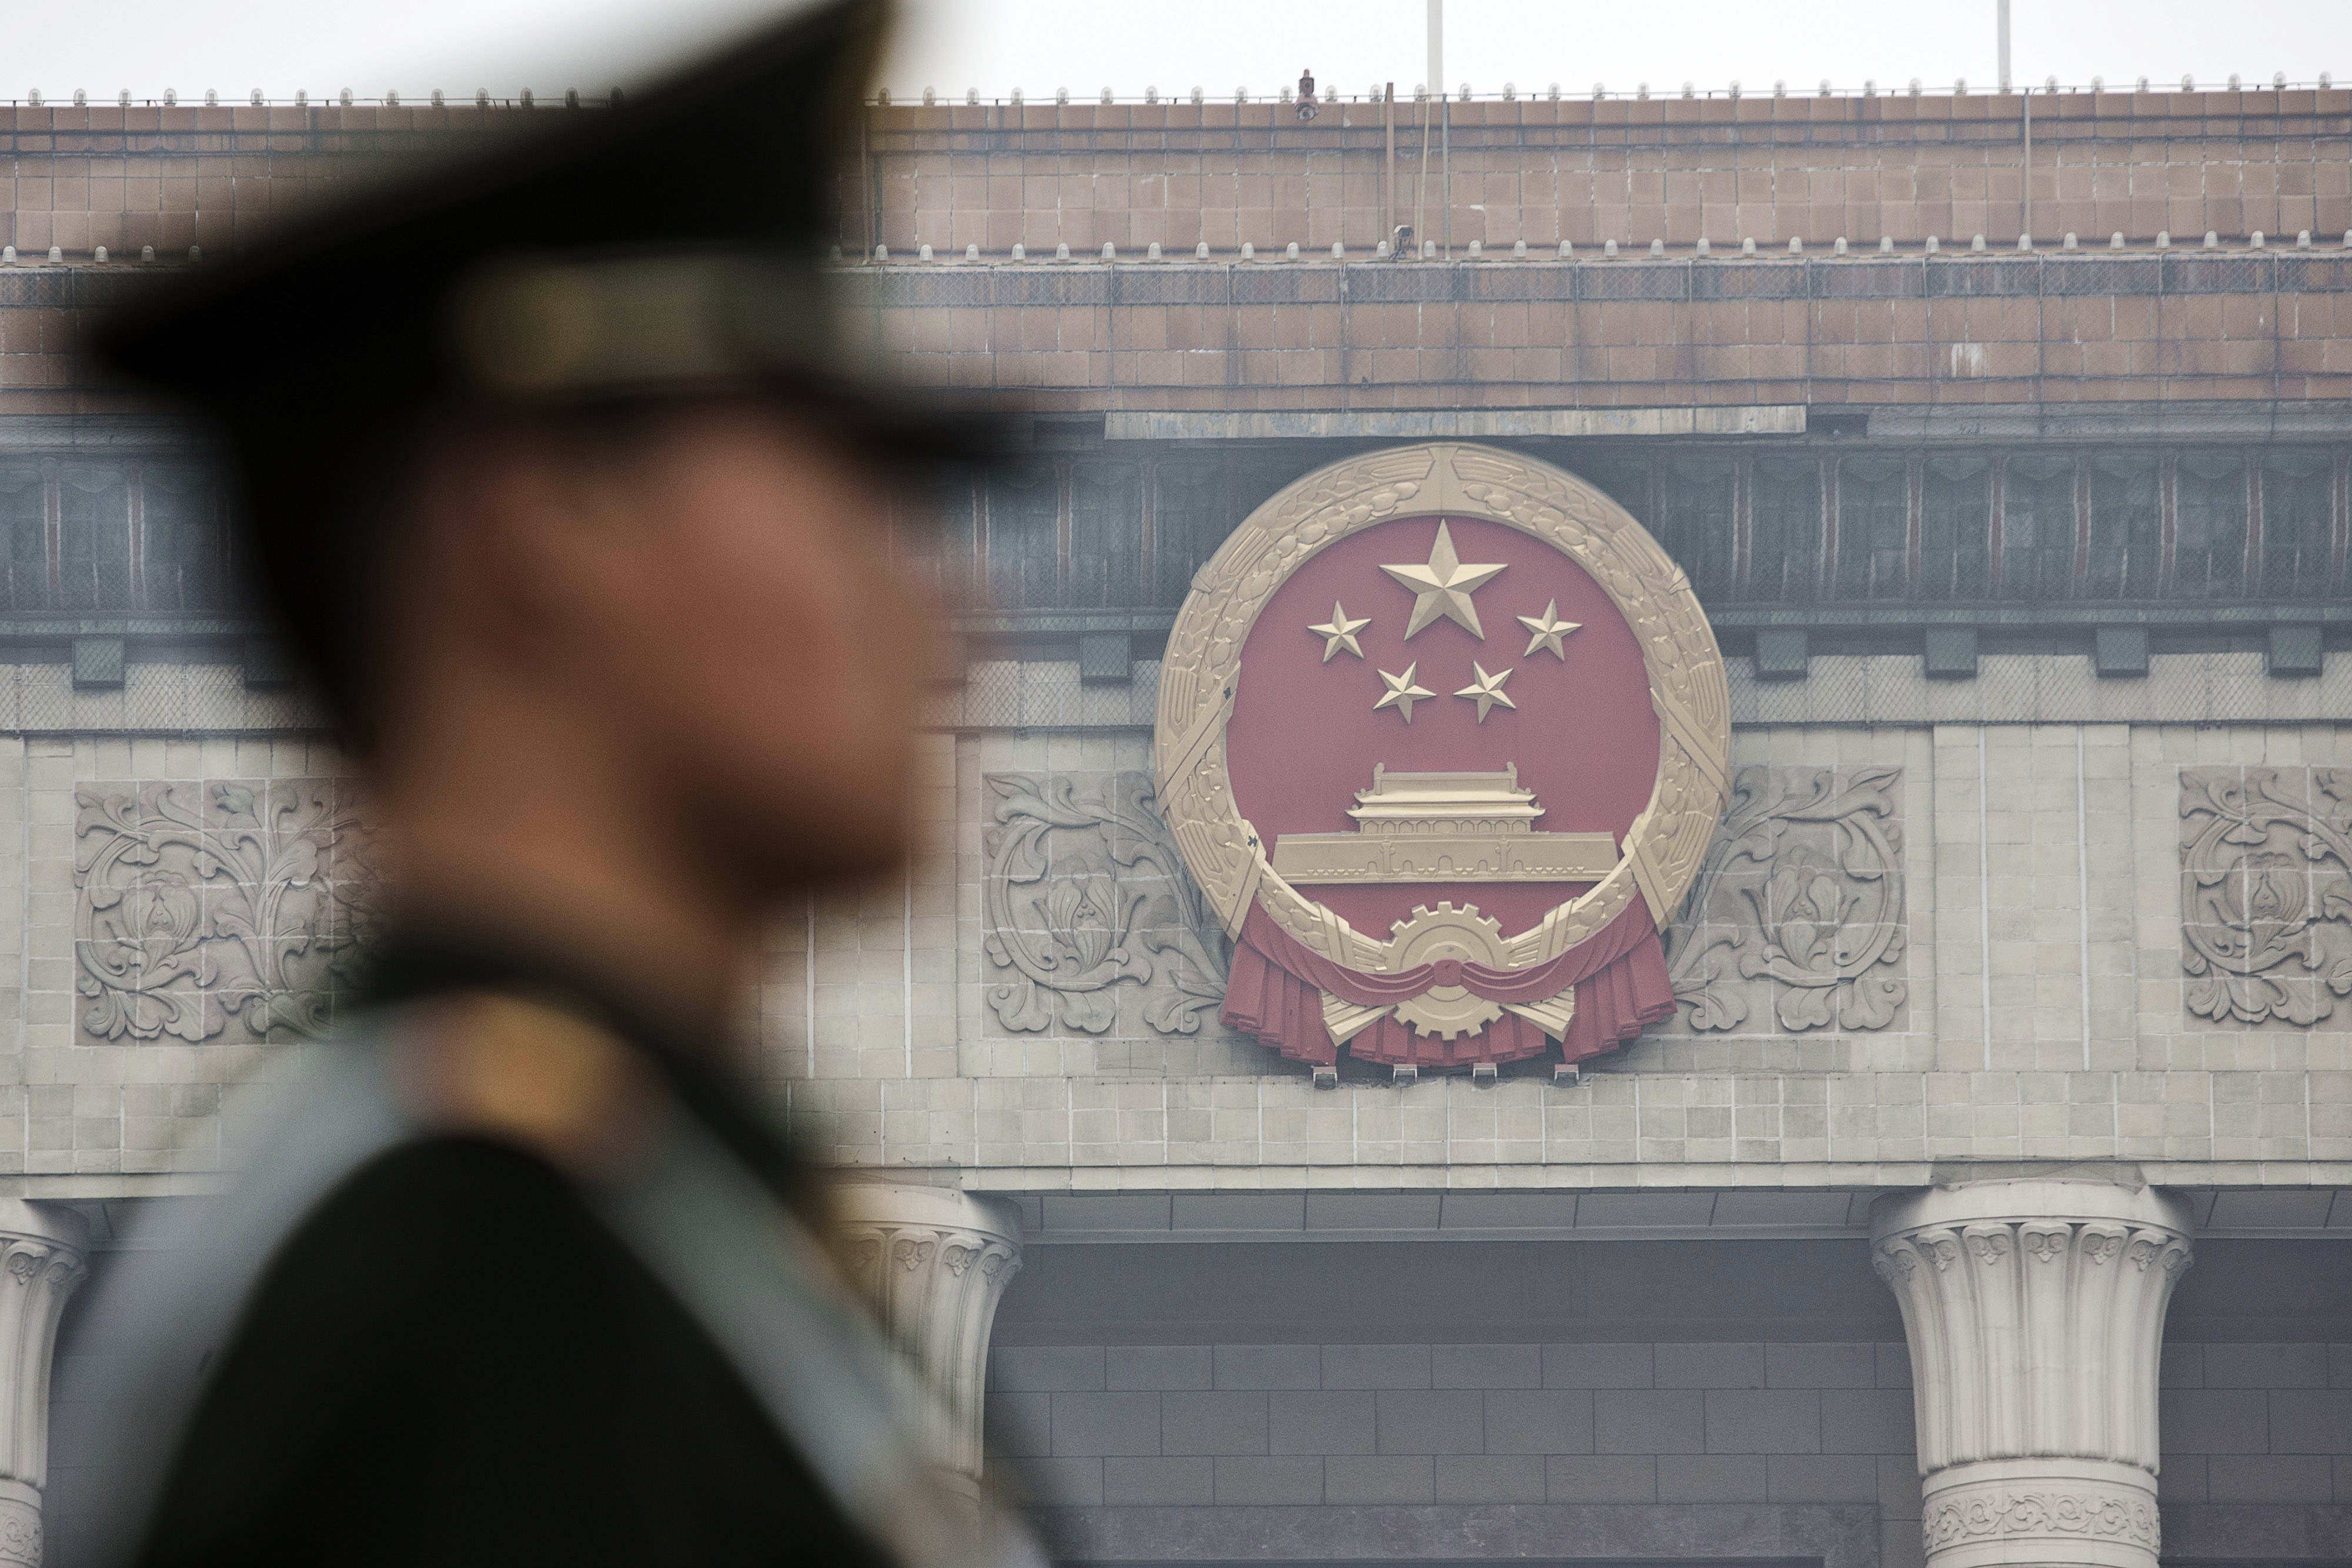 A paramilitary police officer stands guard in front of the Great Hall of the People in Beijing, China, on March 4, 2016. (Qilai Shen—Bloomberg via Getty Images)